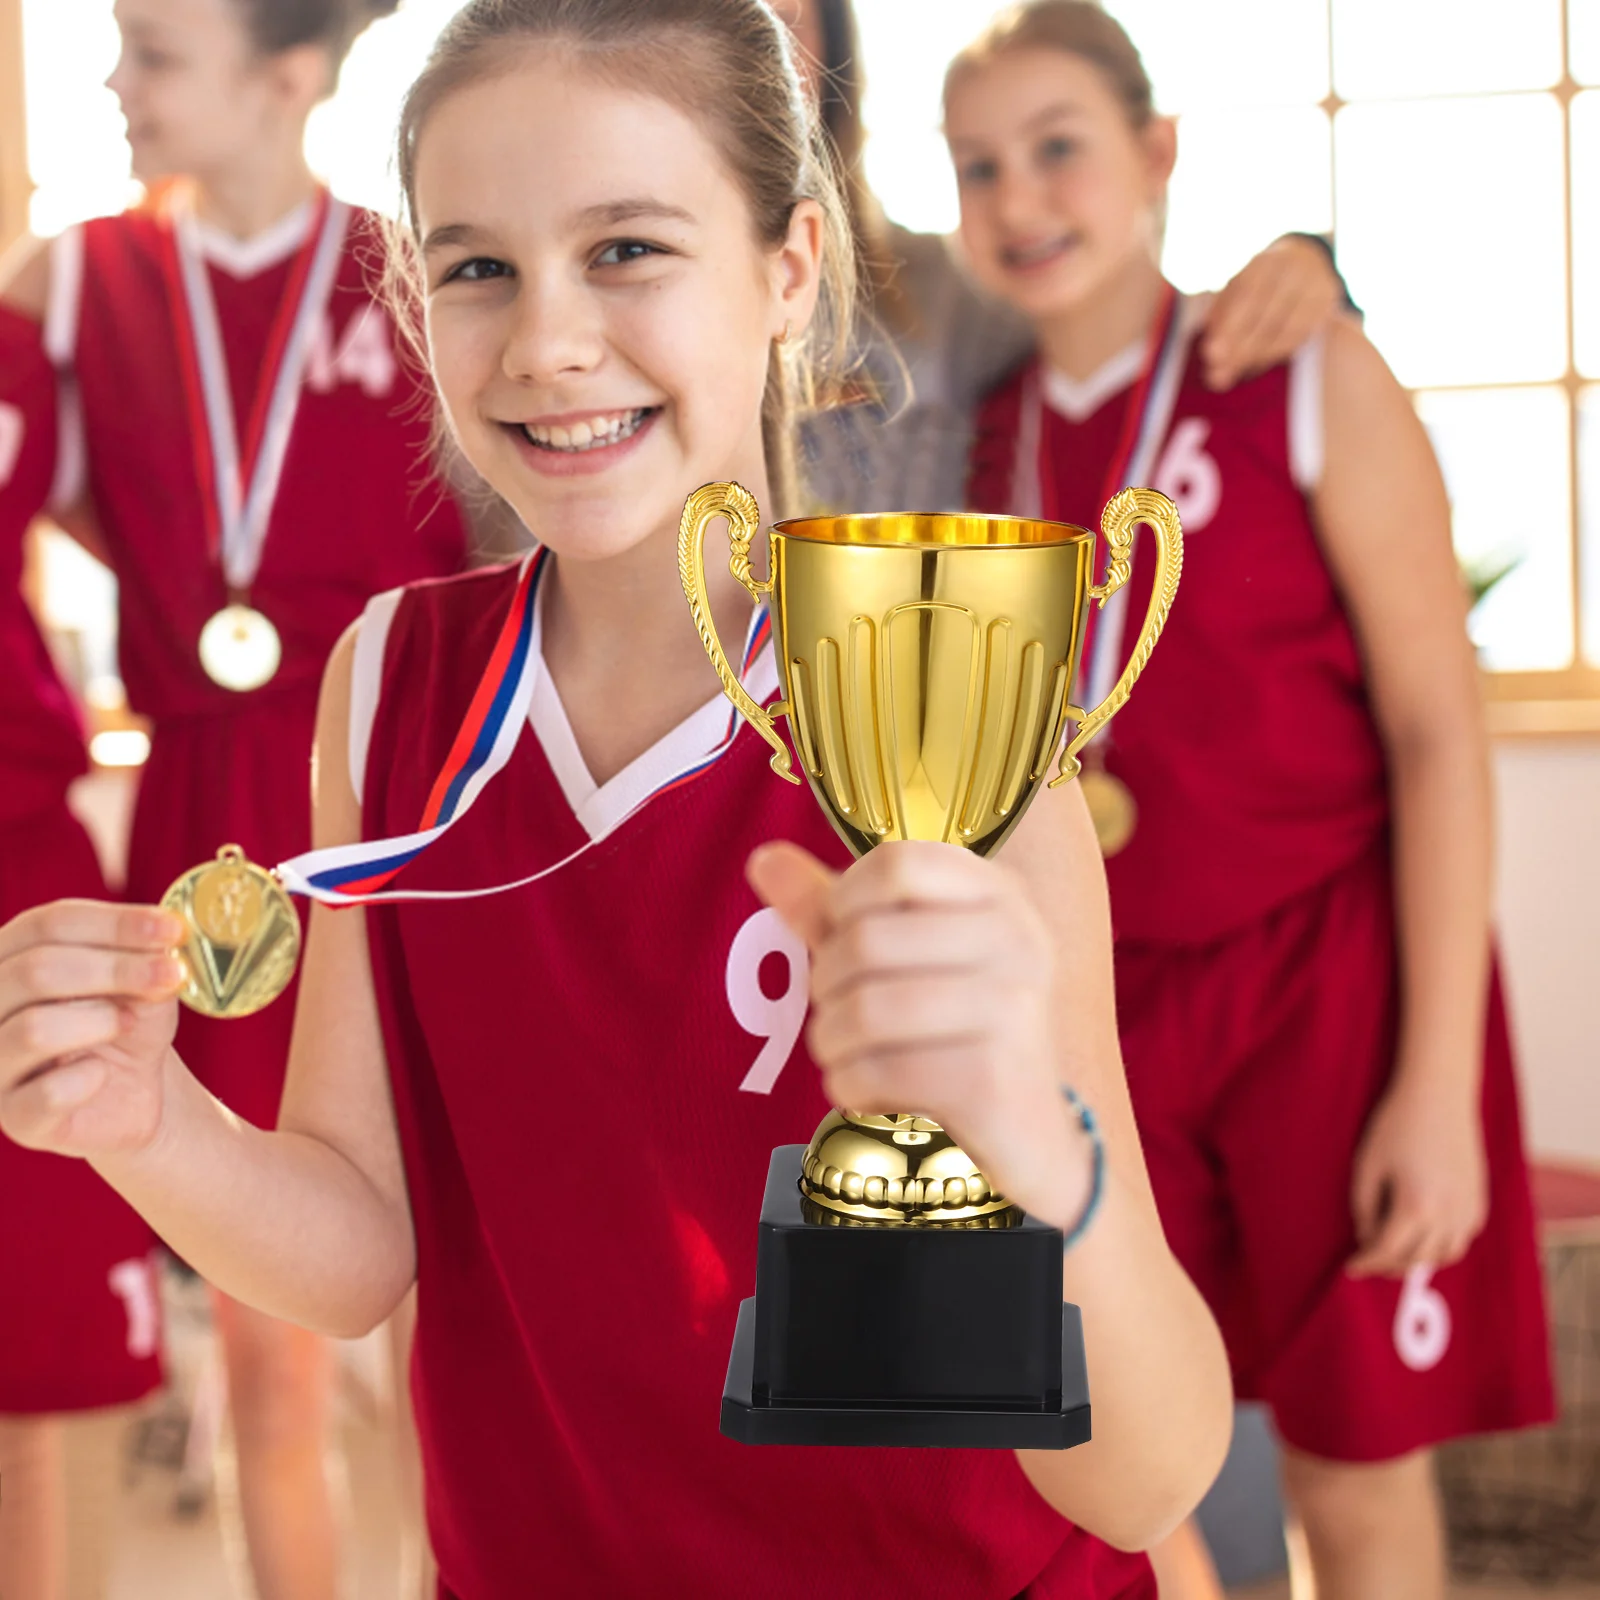 Trophy Award Gold Winner Reward Cups Student Sports Competition Plastic Trophy Cup Souvenirs Celebrations Gifts